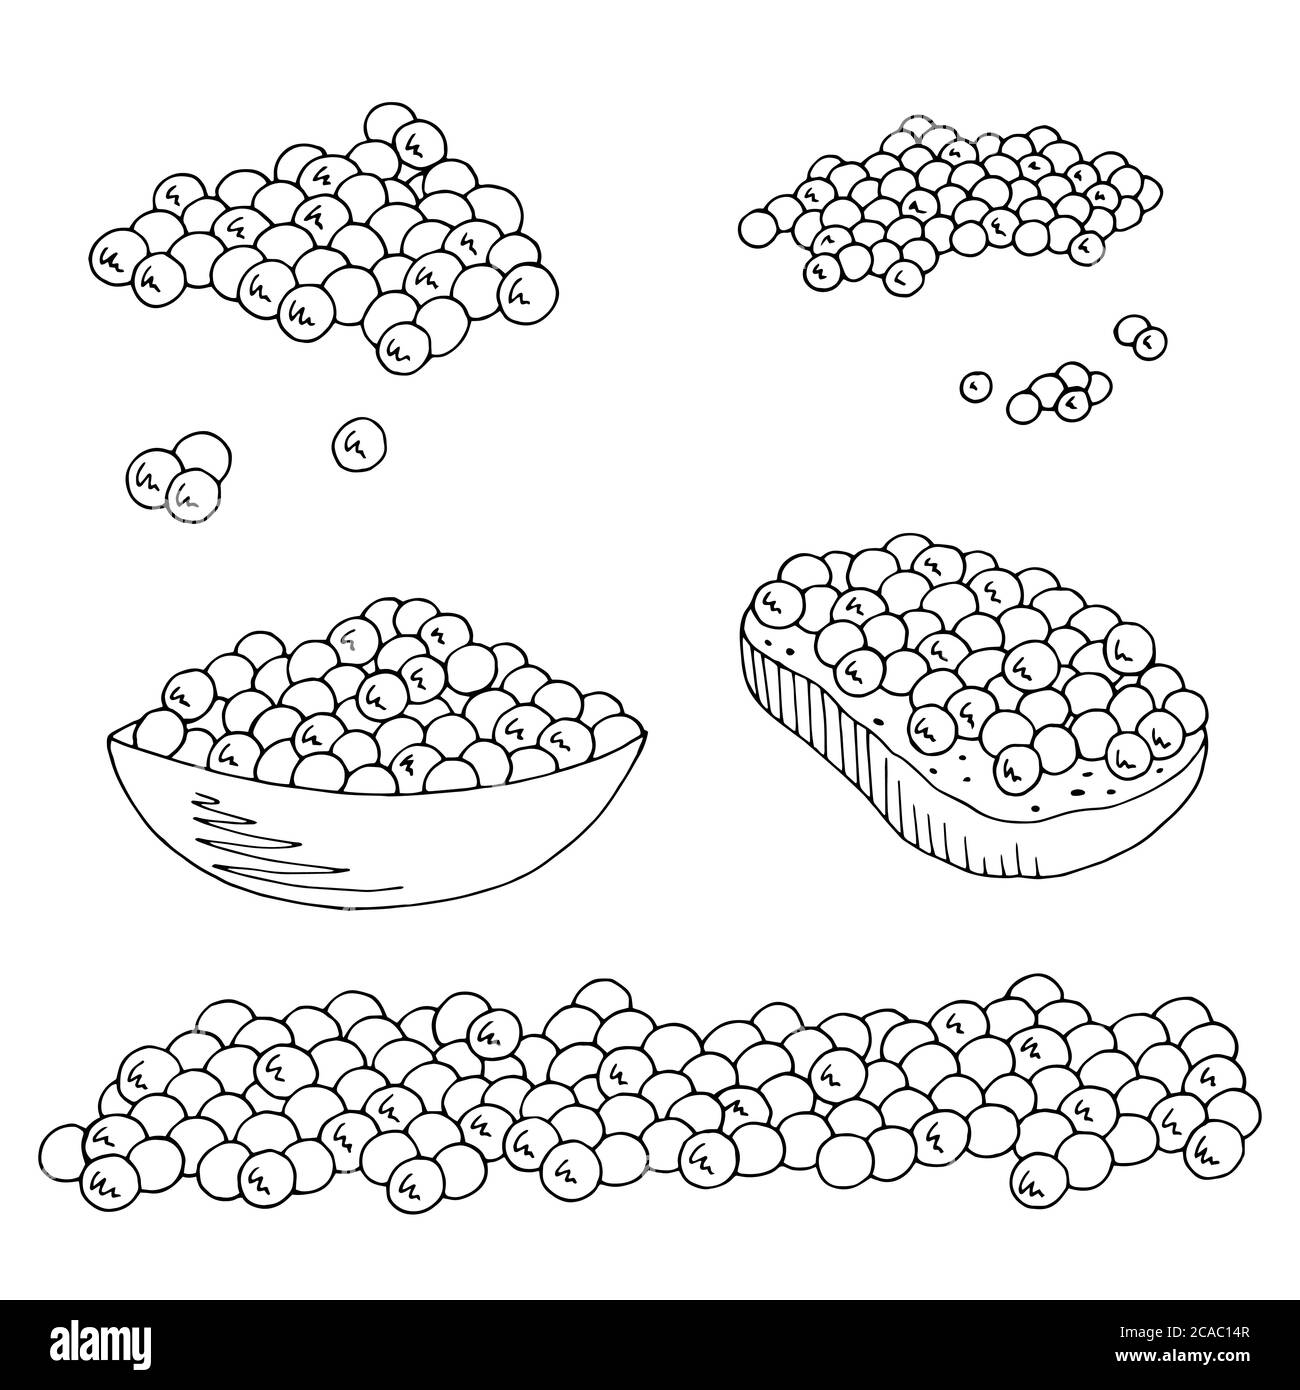 Caviar food set graphic black white isolated sketch illustration vector Stock Vector